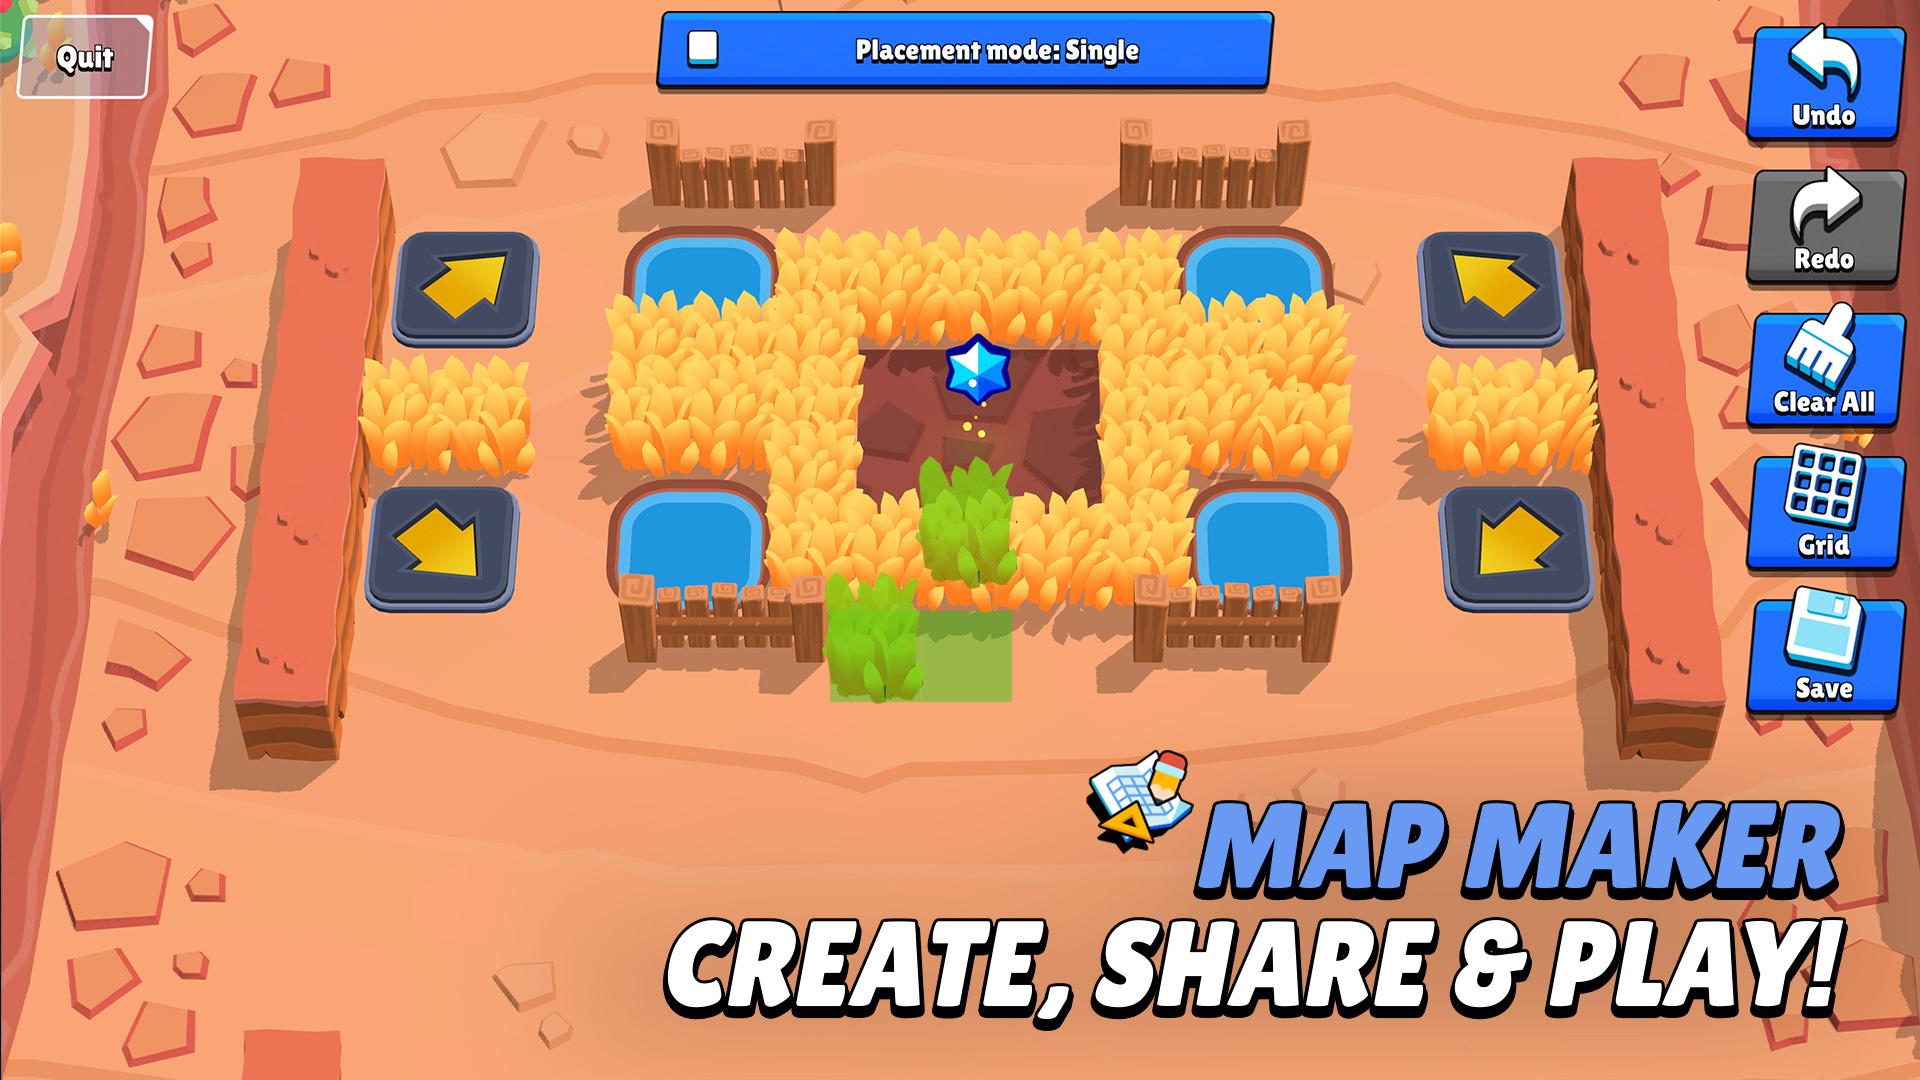 Brawl Stars Apk Download Pick Up Your Hero Characters In 3v3 Smash And Grab Mode Brock Shelly Jessie And Barley - brawl stars dowload apkpure